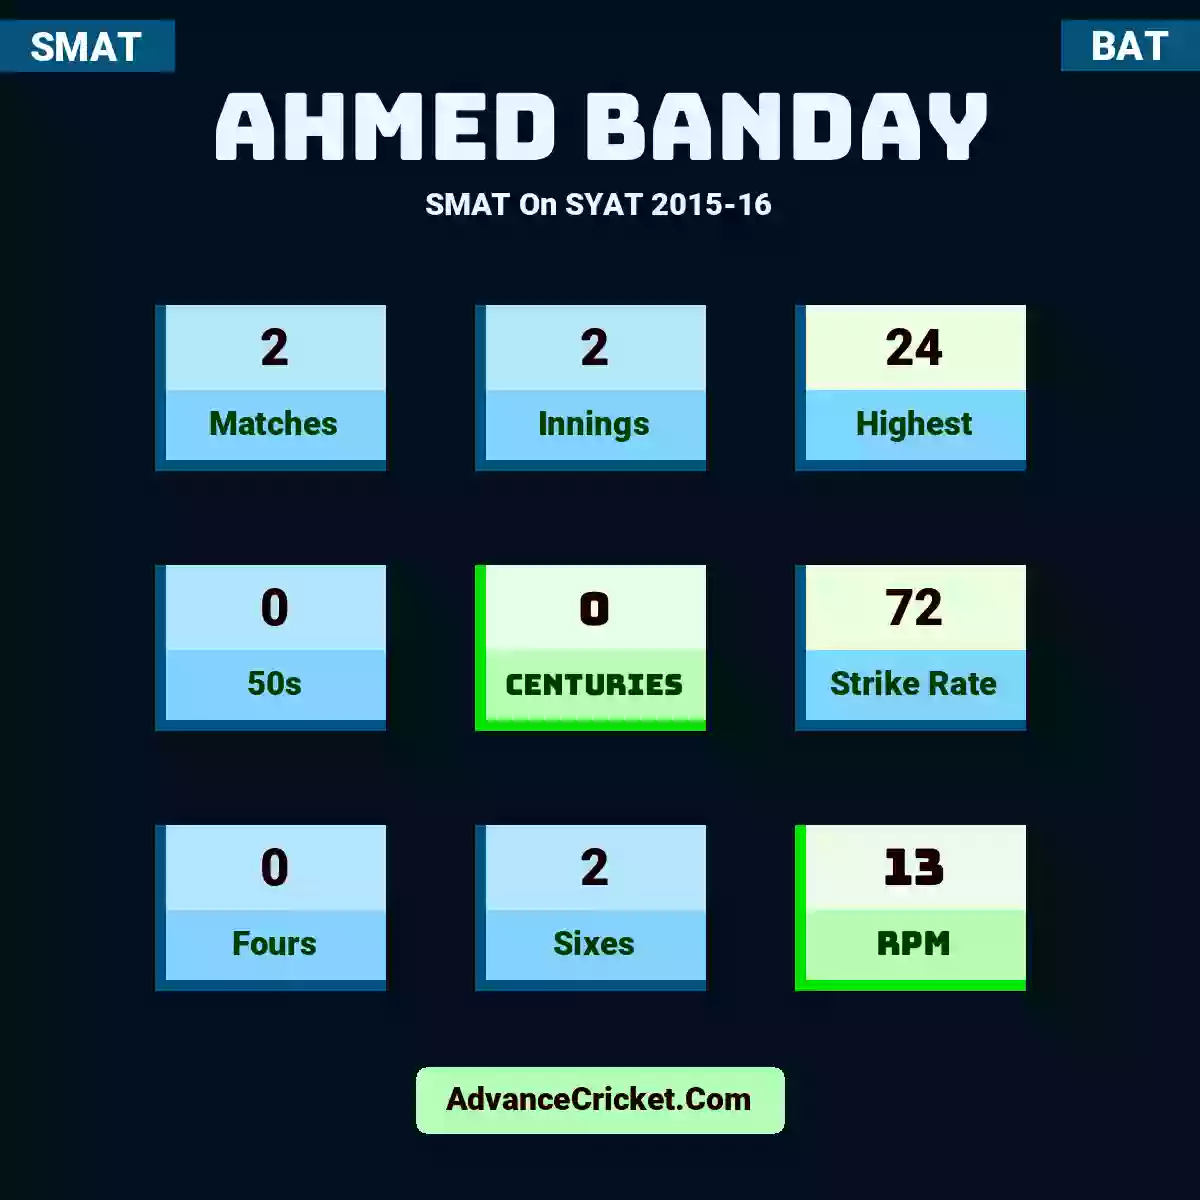 Ahmed Banday SMAT  On SYAT 2015-16, Ahmed Banday played 2 matches, scored 24 runs as highest, 0 half-centuries, and 0 centuries, with a strike rate of 72. A.Banday hit 0 fours and 2 sixes, with an RPM of 13.